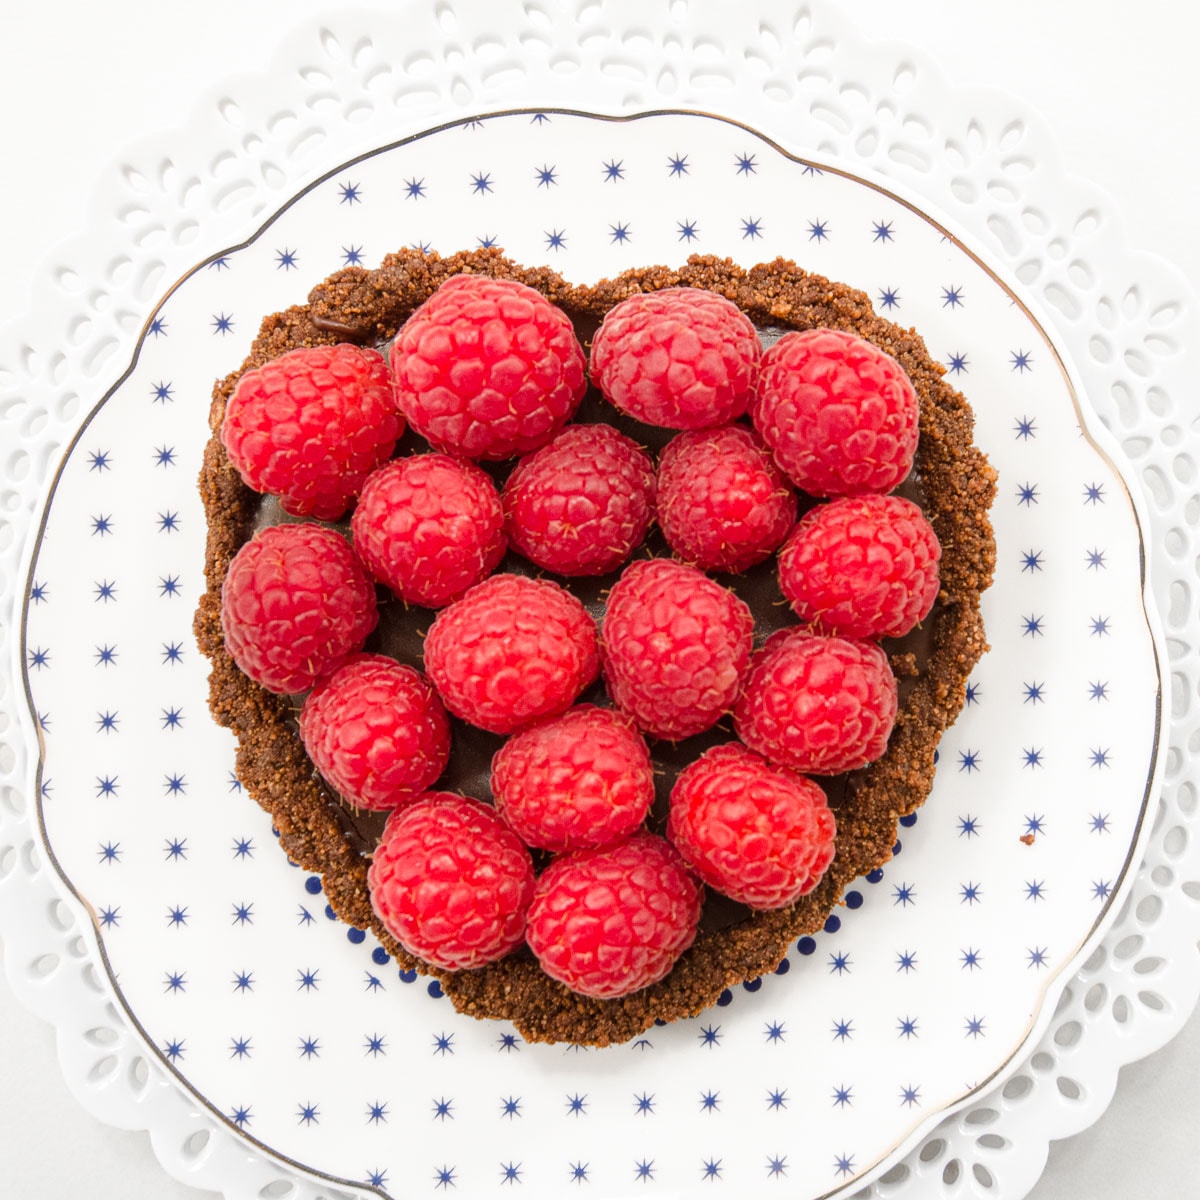 A Chocolate Raspberry Truffle Tart sits on a gold edged white plate with blue dots on top of a lace edged white plate.